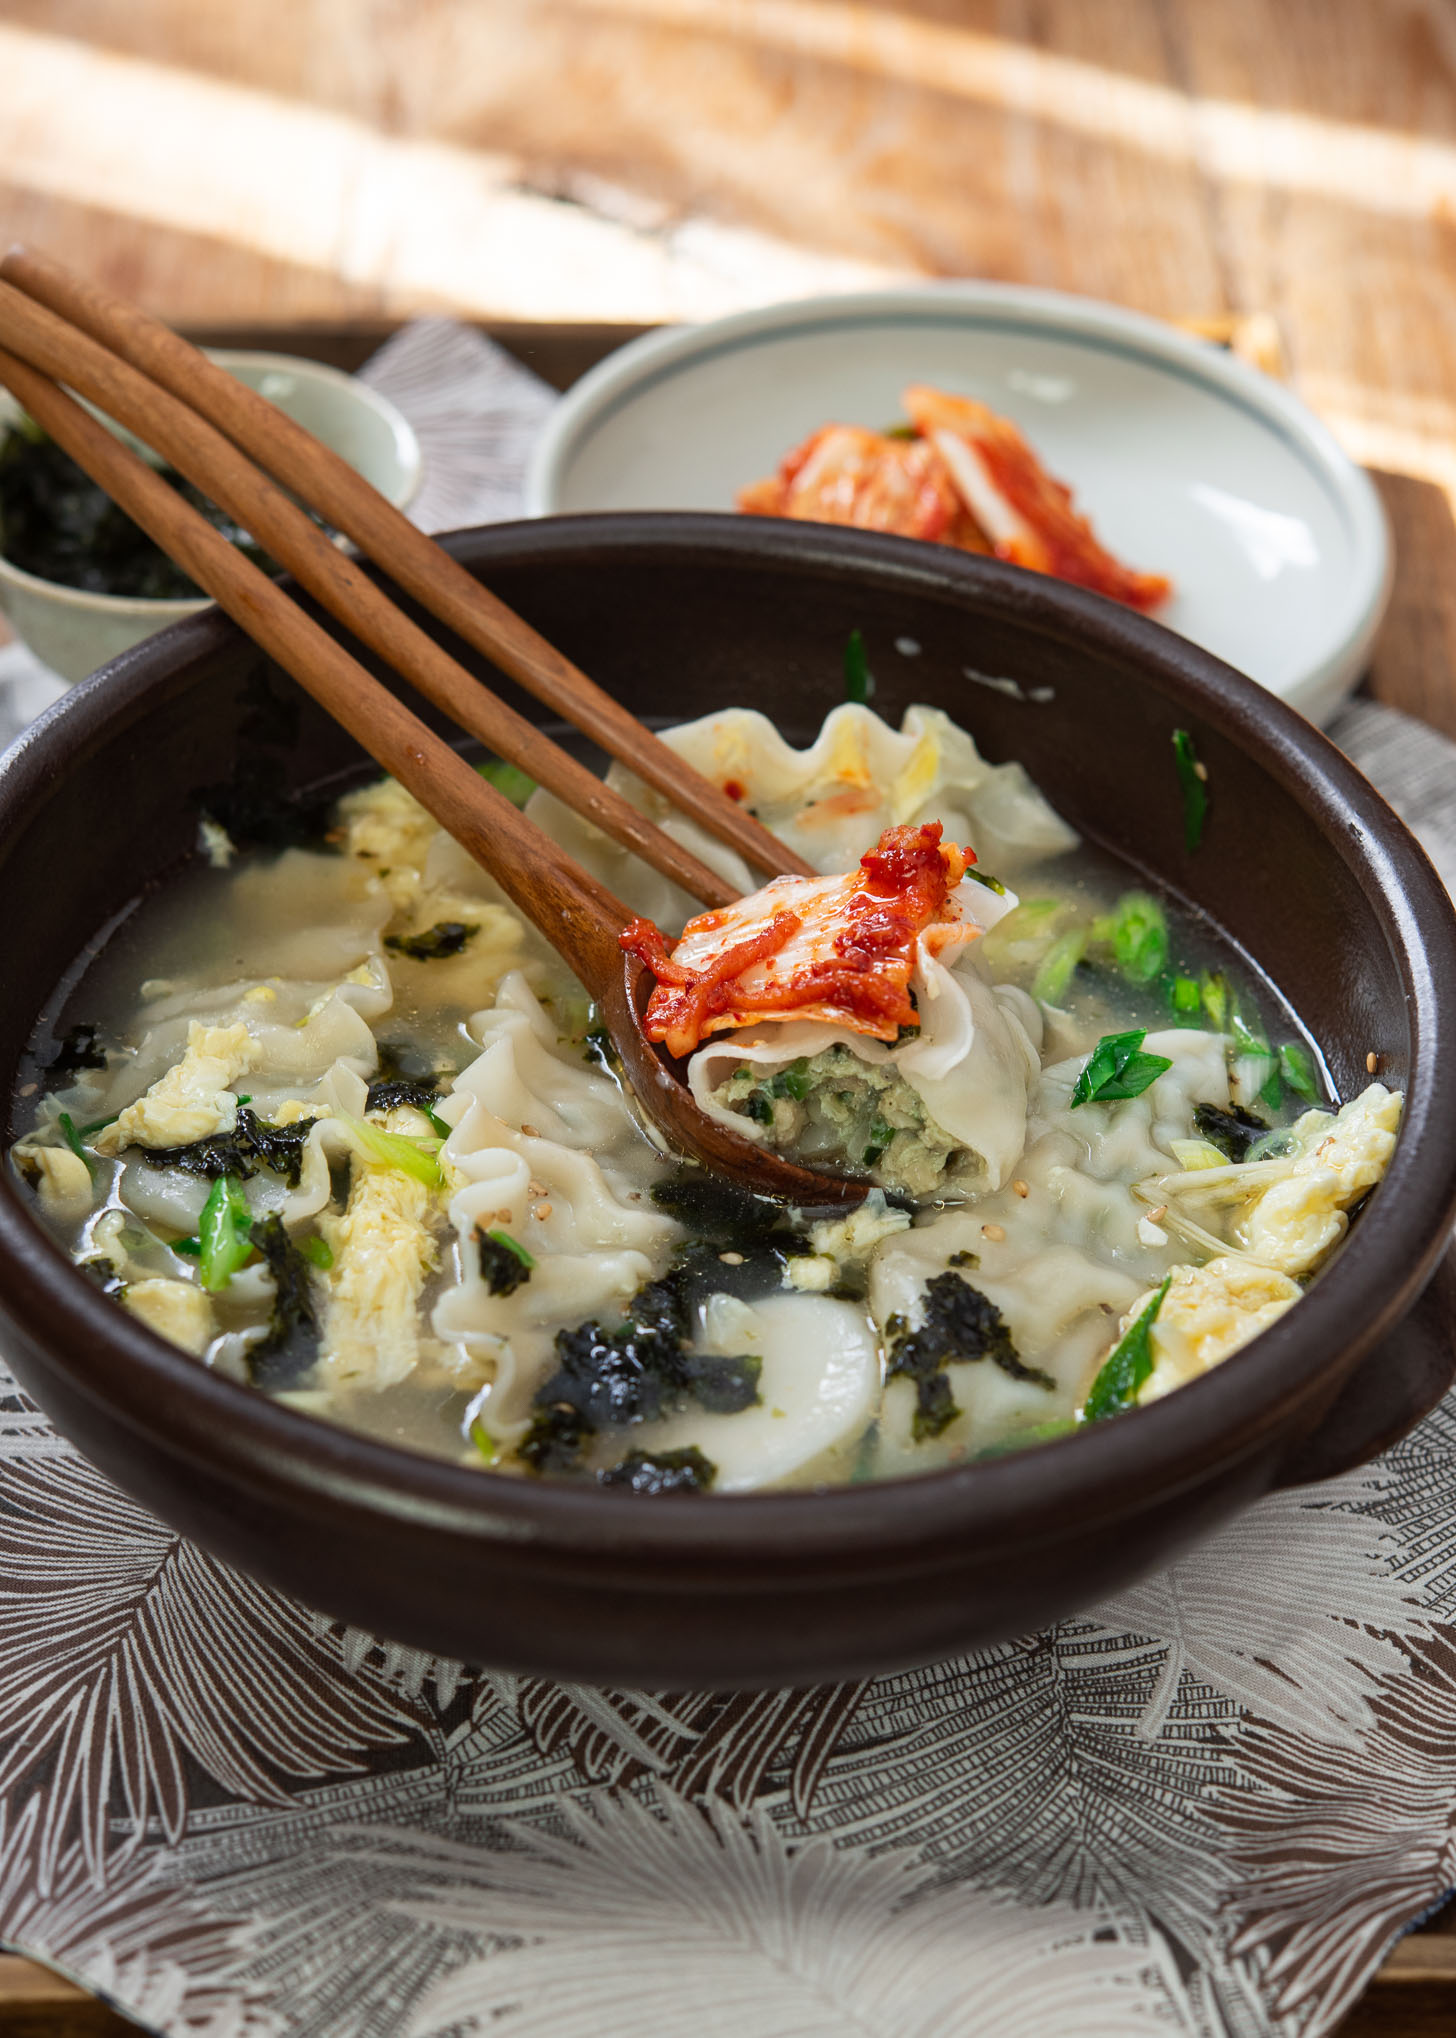 Korean dumpling soup is served with kimchi in a bowl.